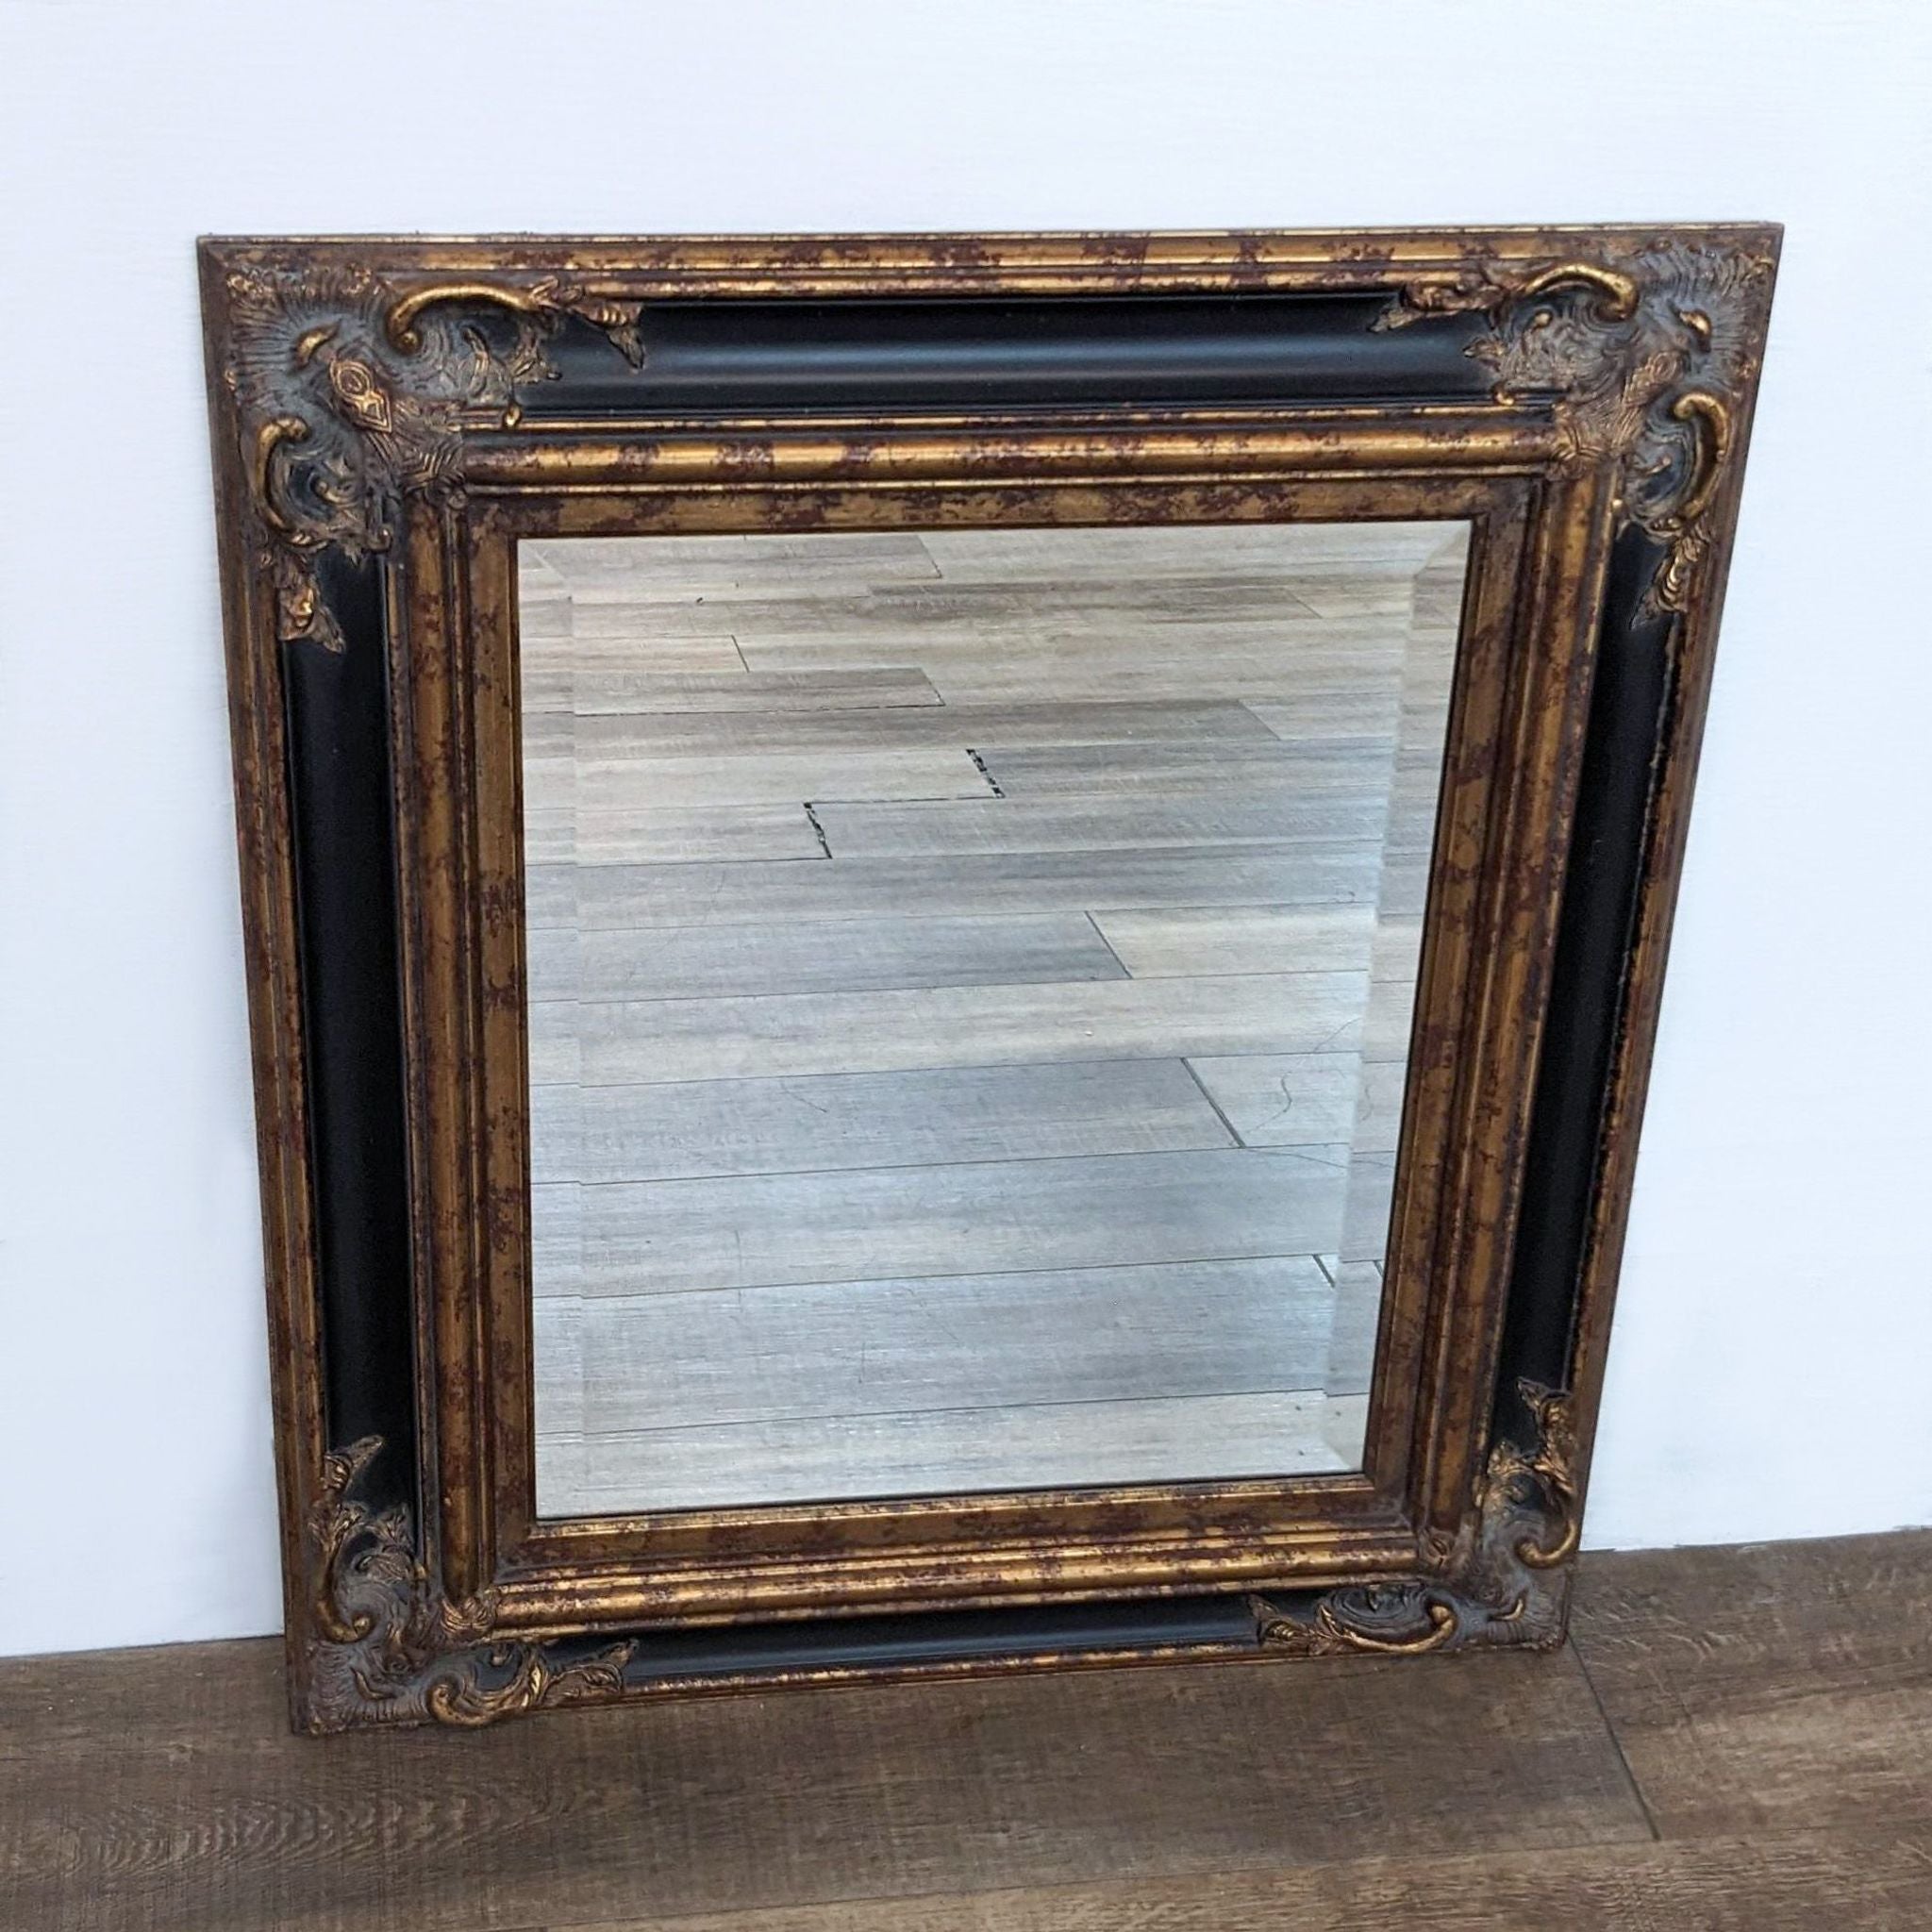 Vintage-style Baker Knapp and Tubbs framed wall mirror with detailed corners on a wooden floor.